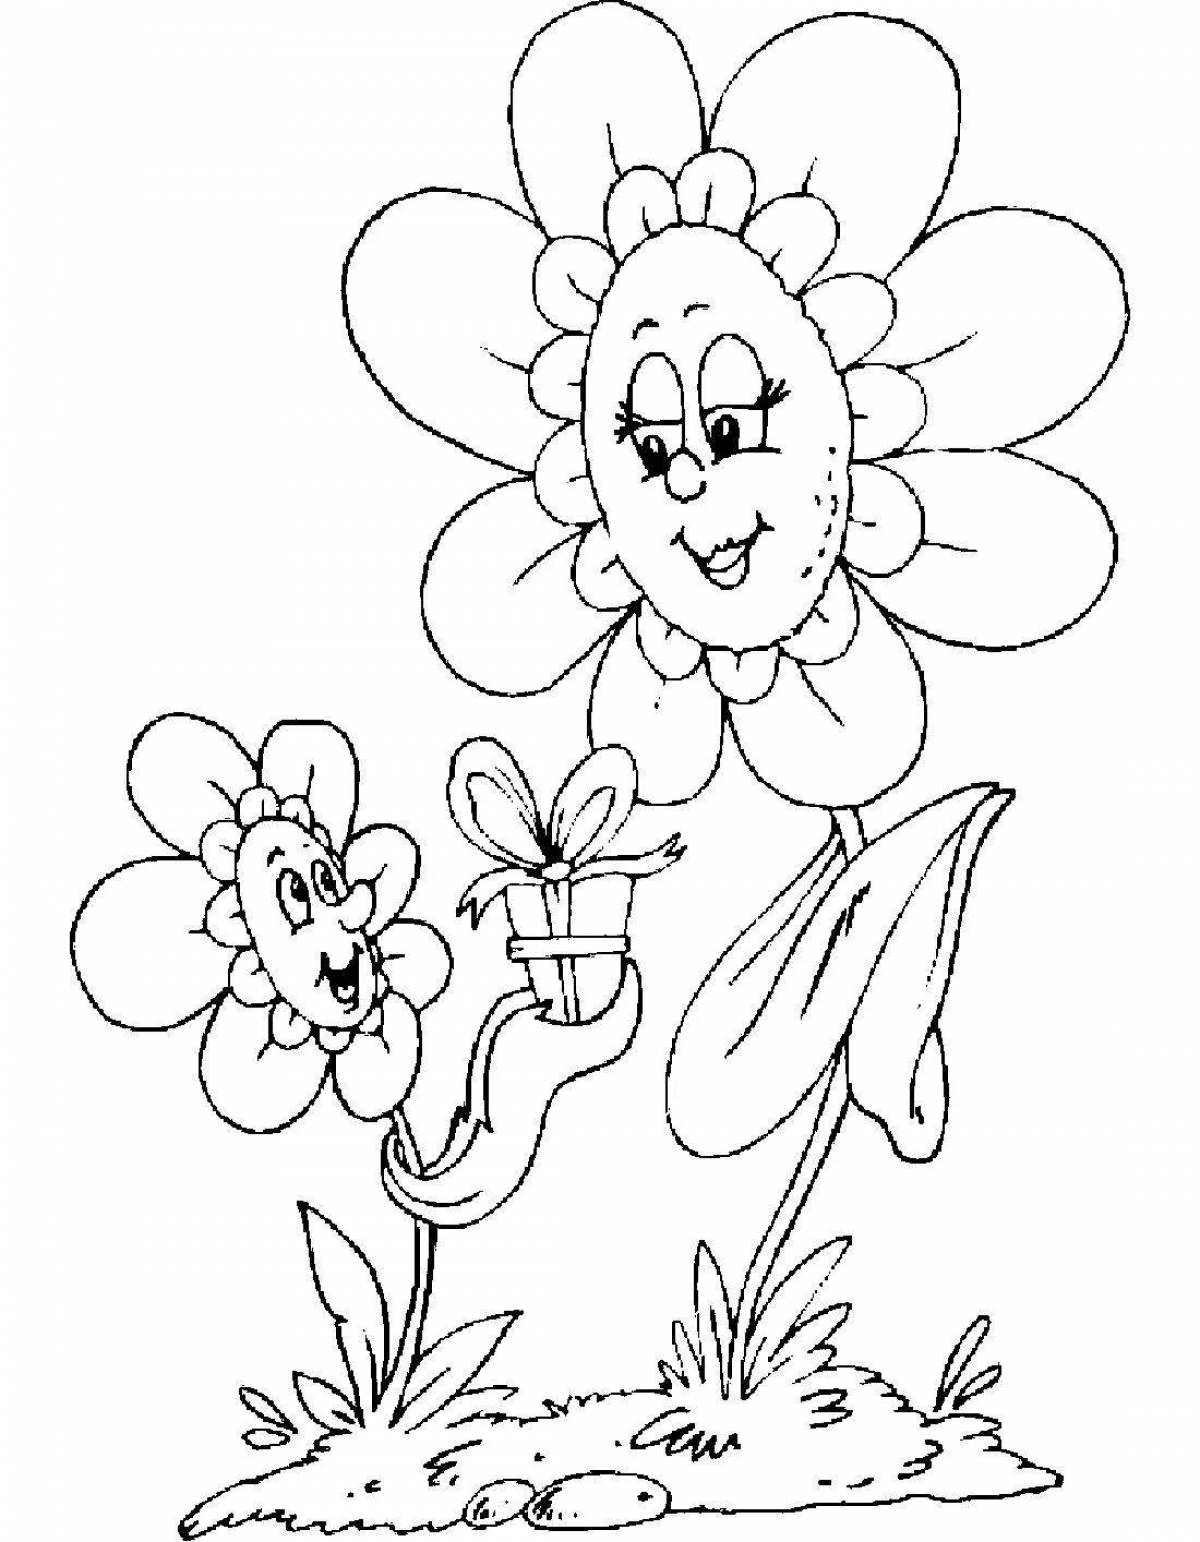 Coloring page nice chamomile flower